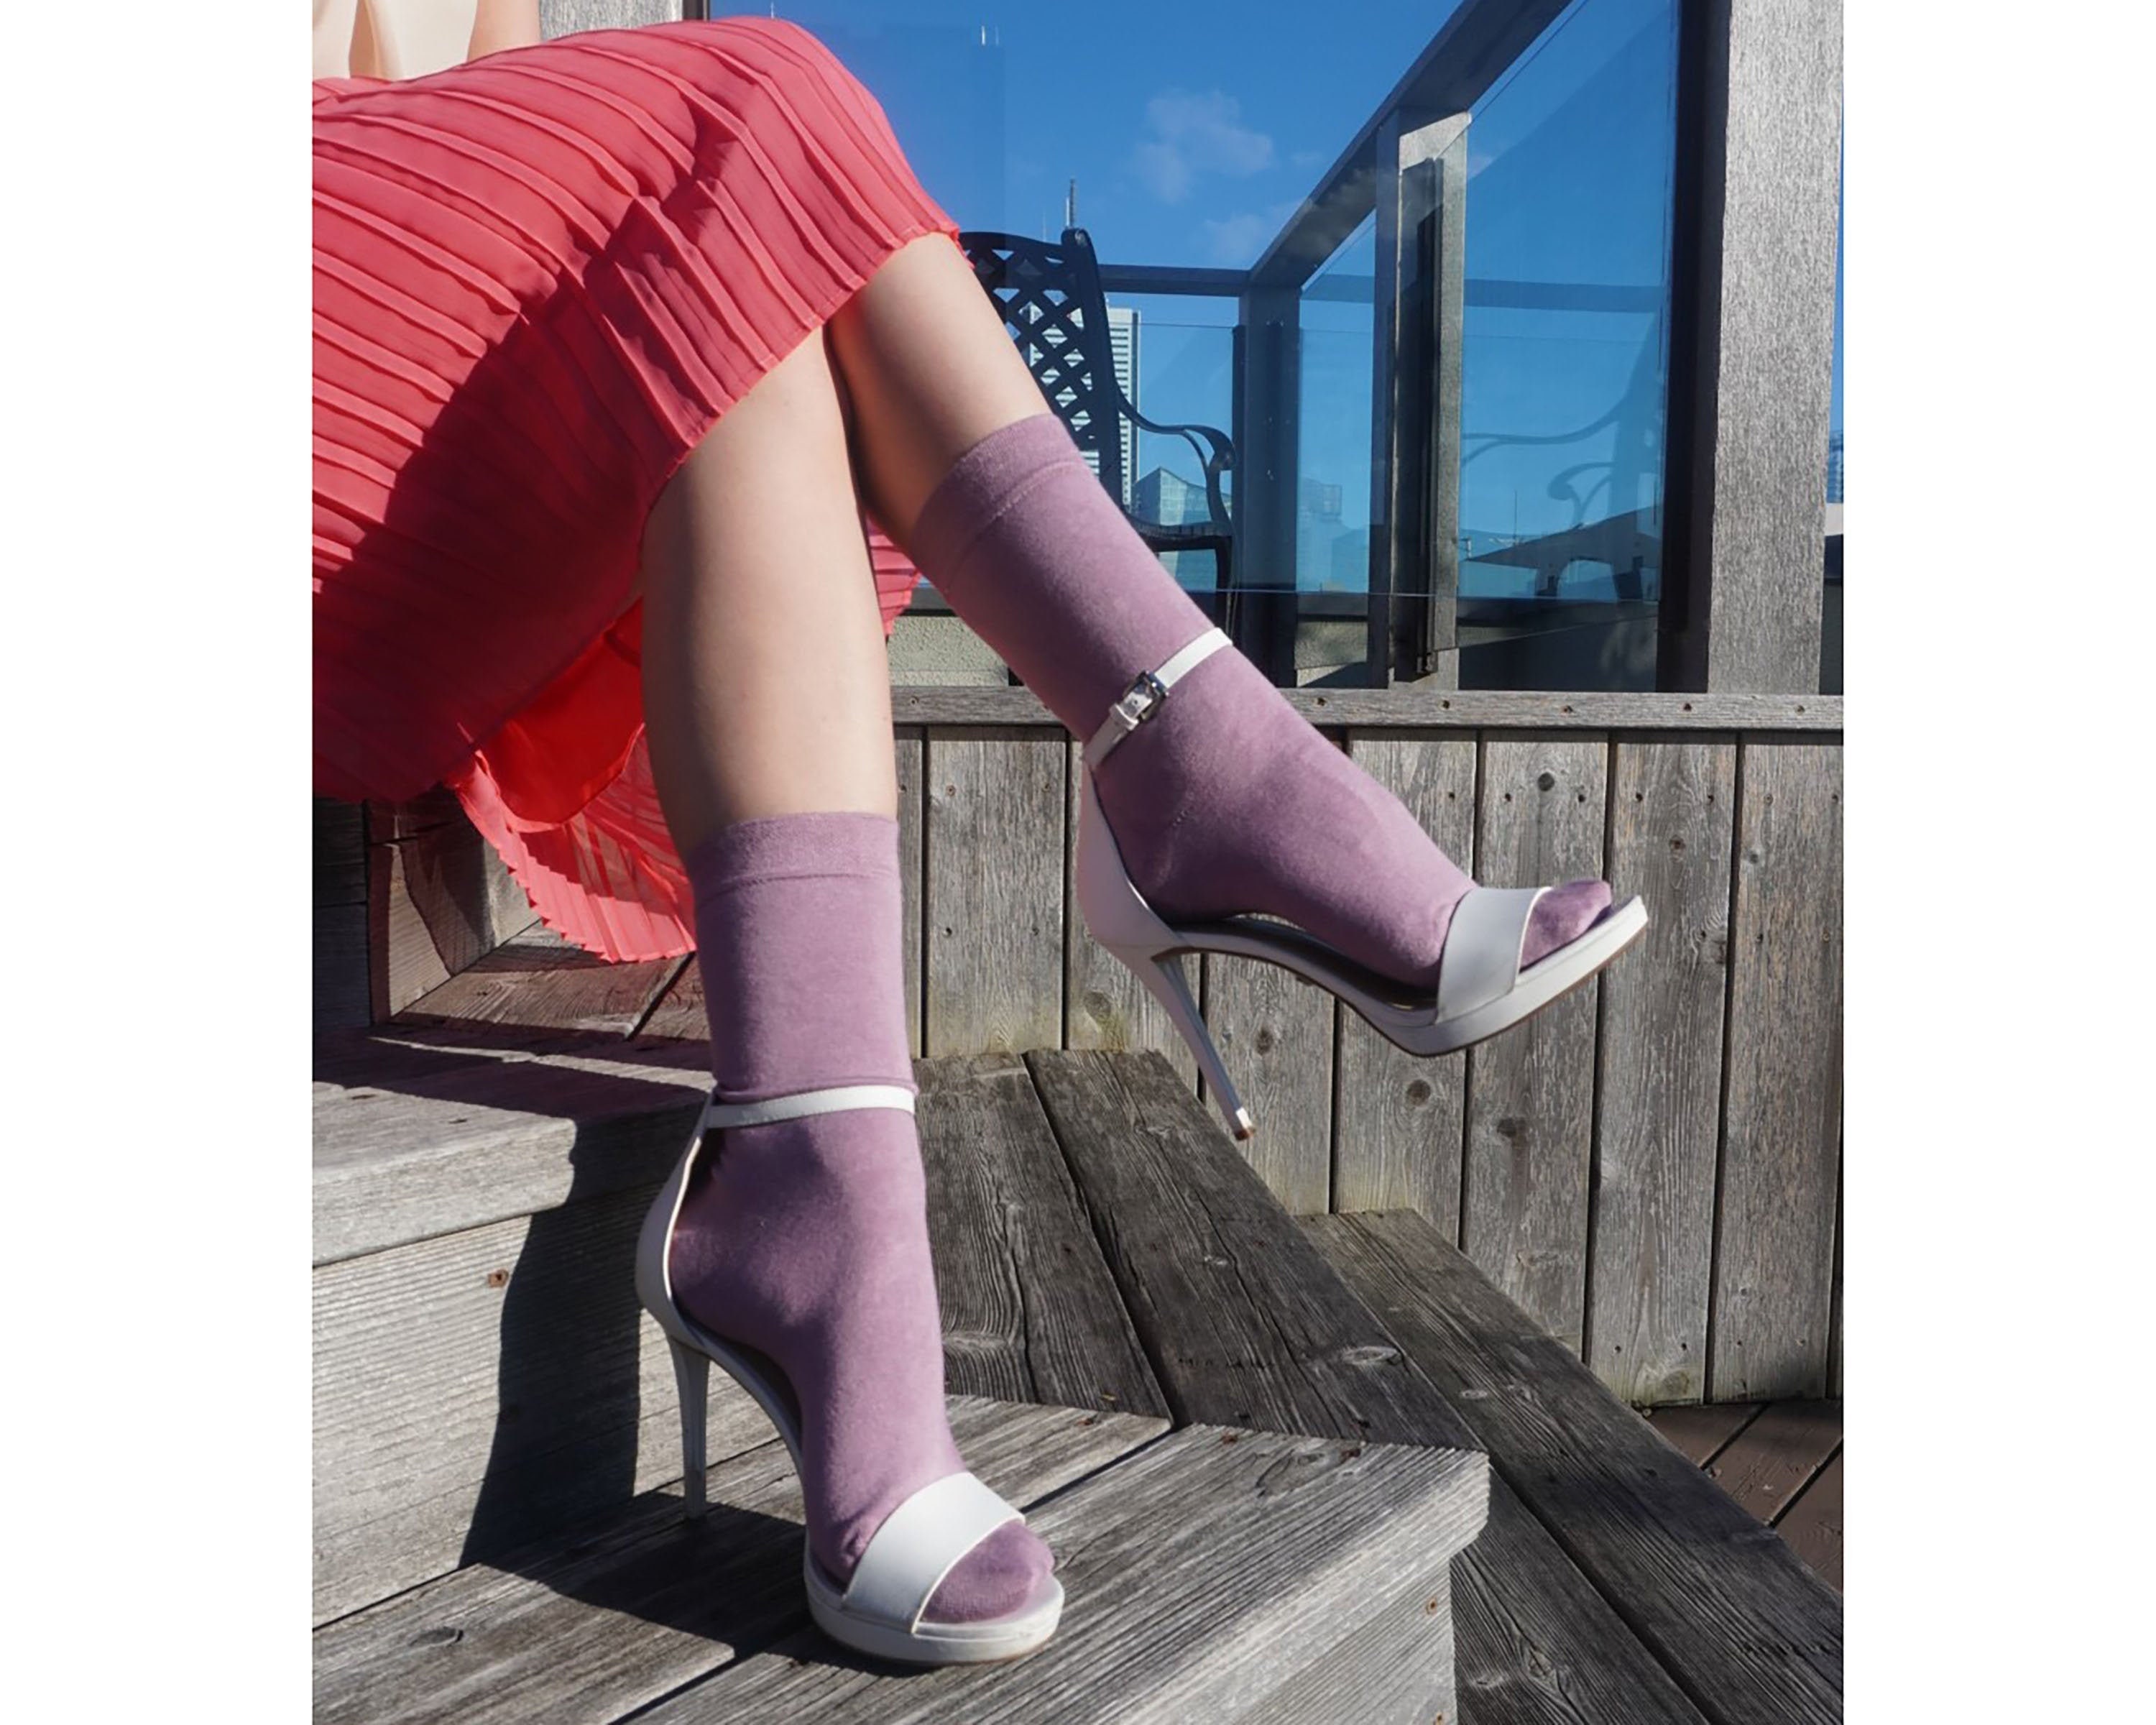 White Socks with Rose Pattern - Women Collection - Sunchoice Socks